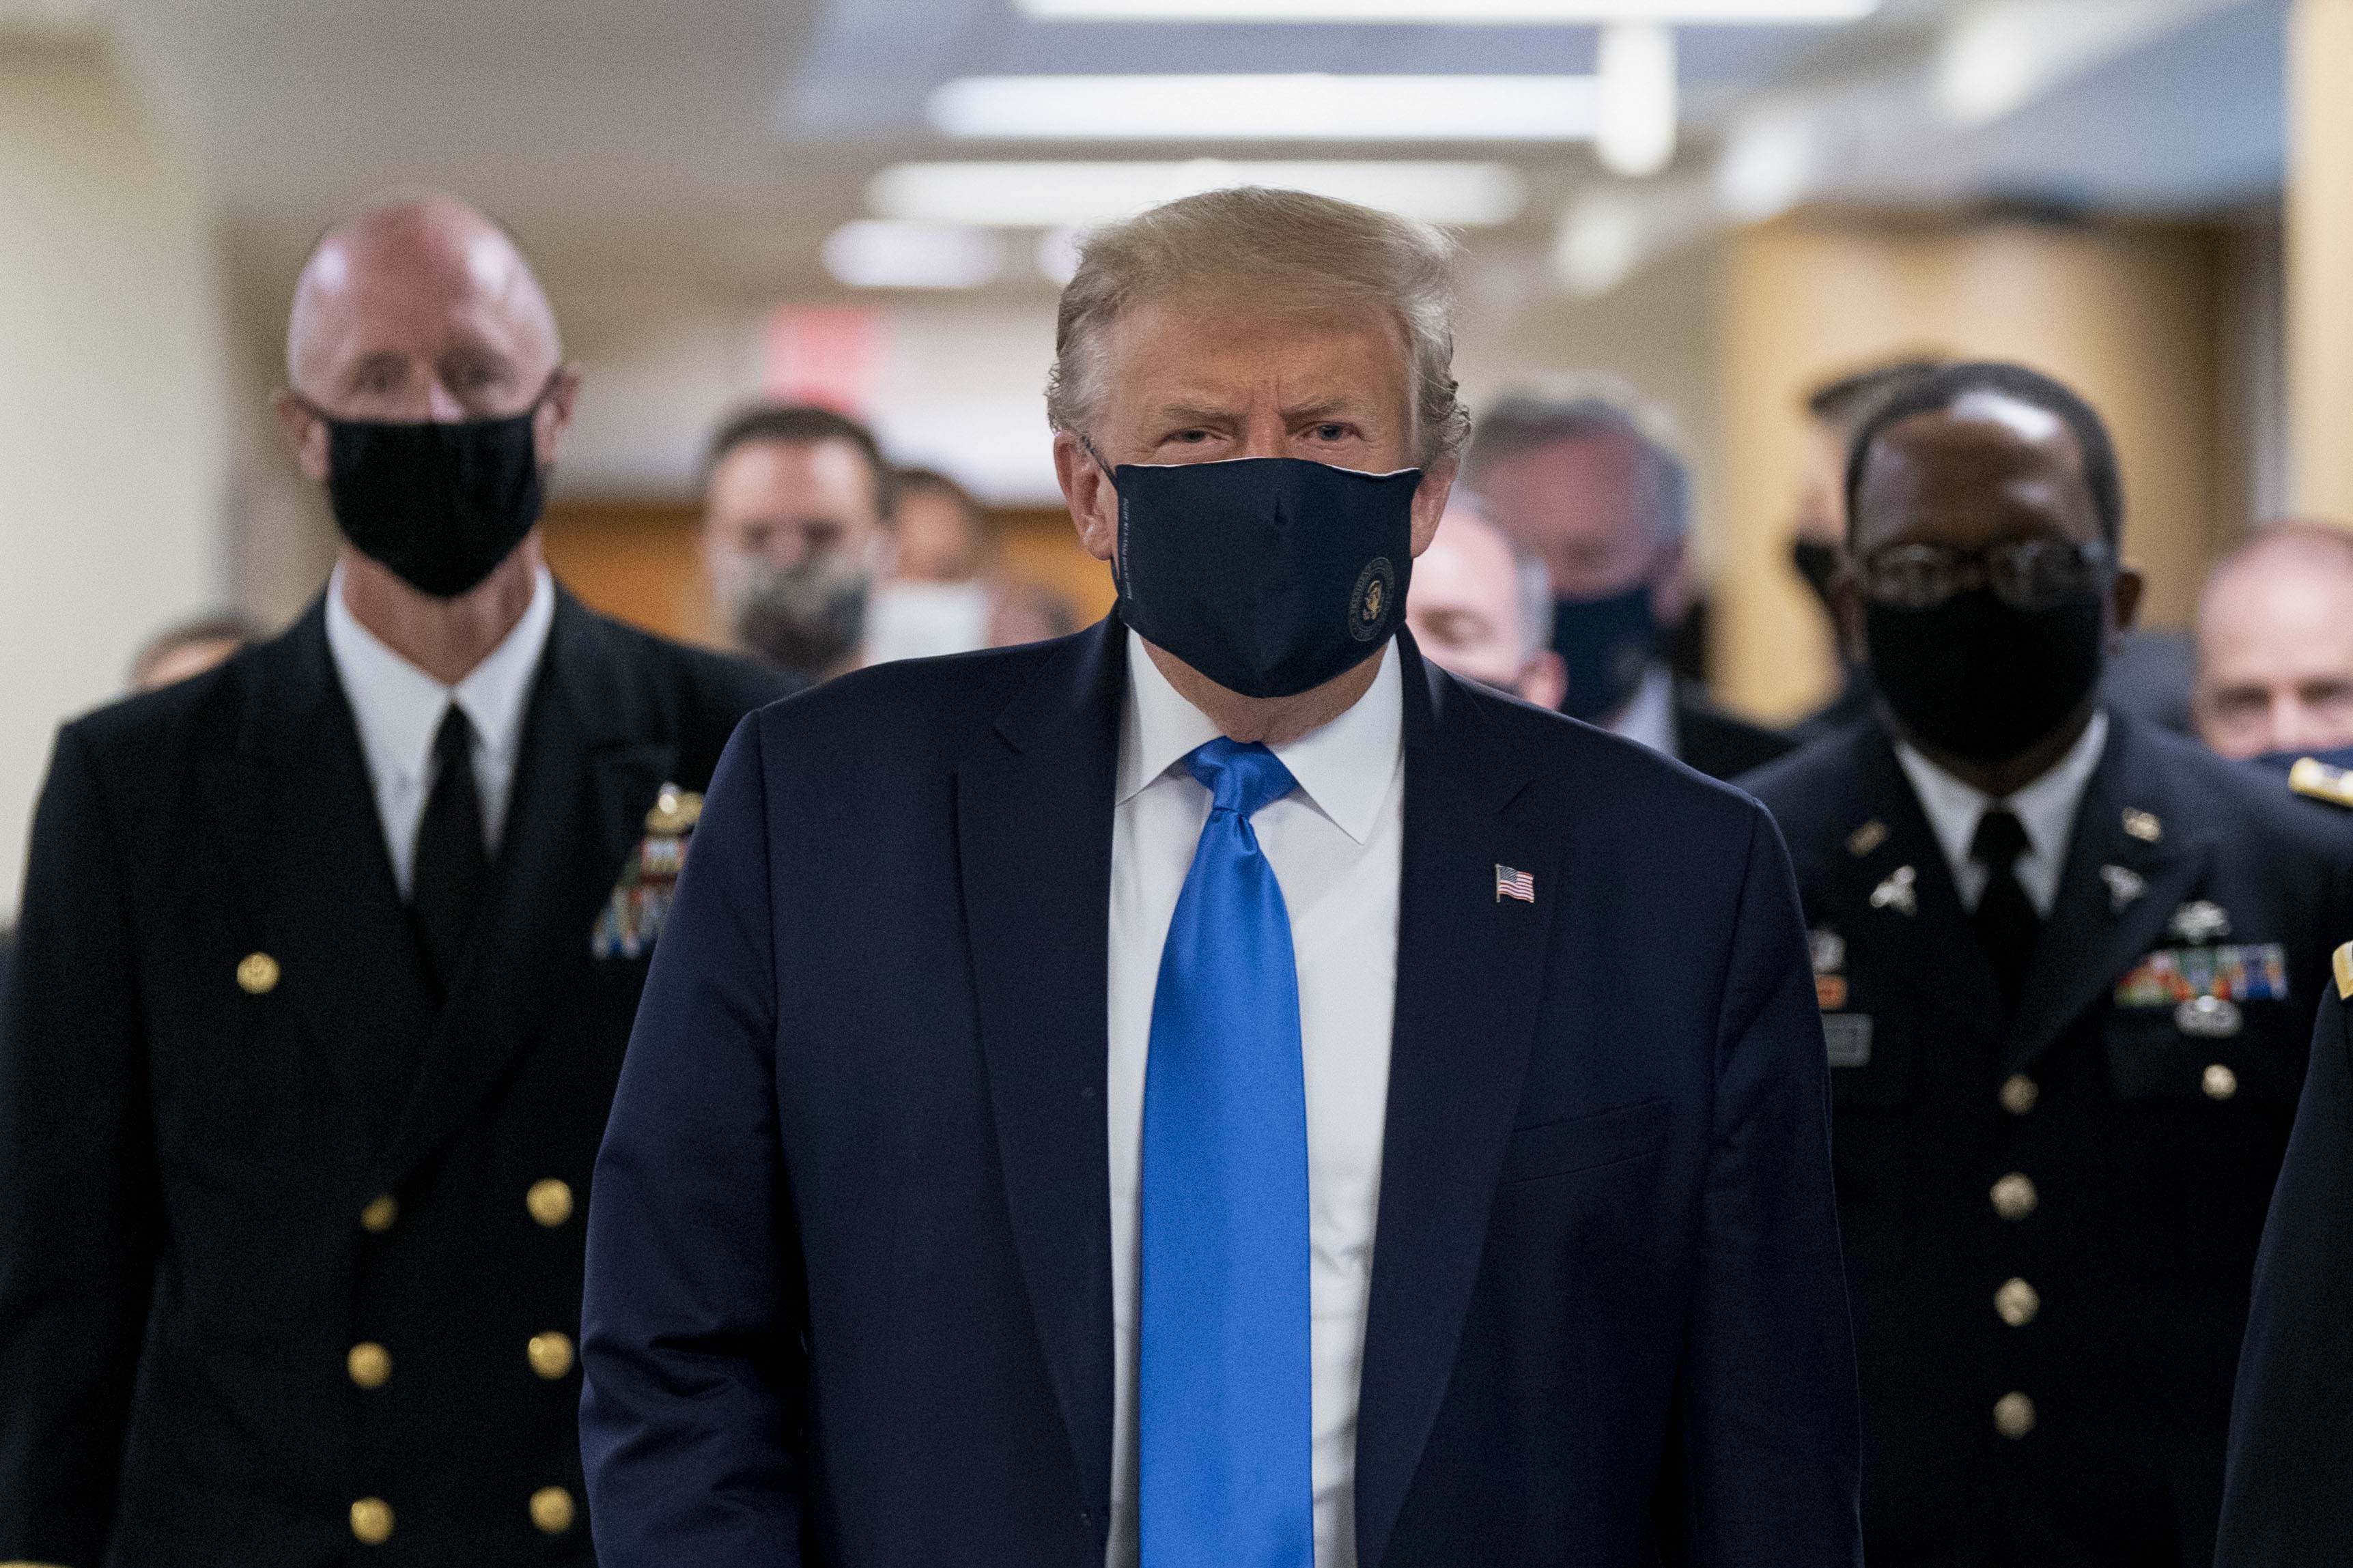 Donald Trump wears a protective mask while visiting Walter Reed National Military Medical Center in Maryland, on July 11.